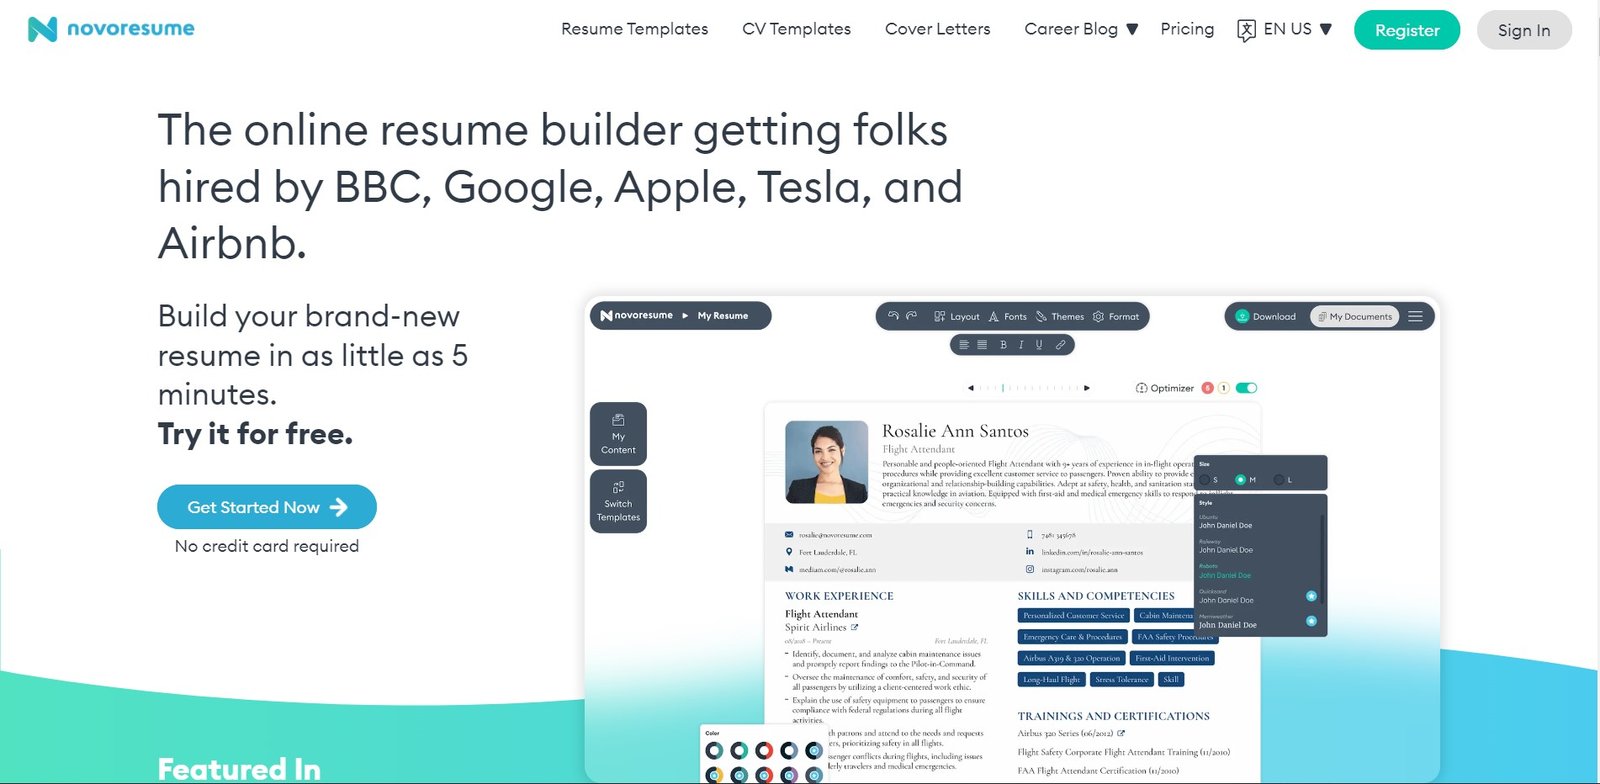 Novoresume is an  AI resume builder to help job seekers create visually appealing and professional resumes quickly.